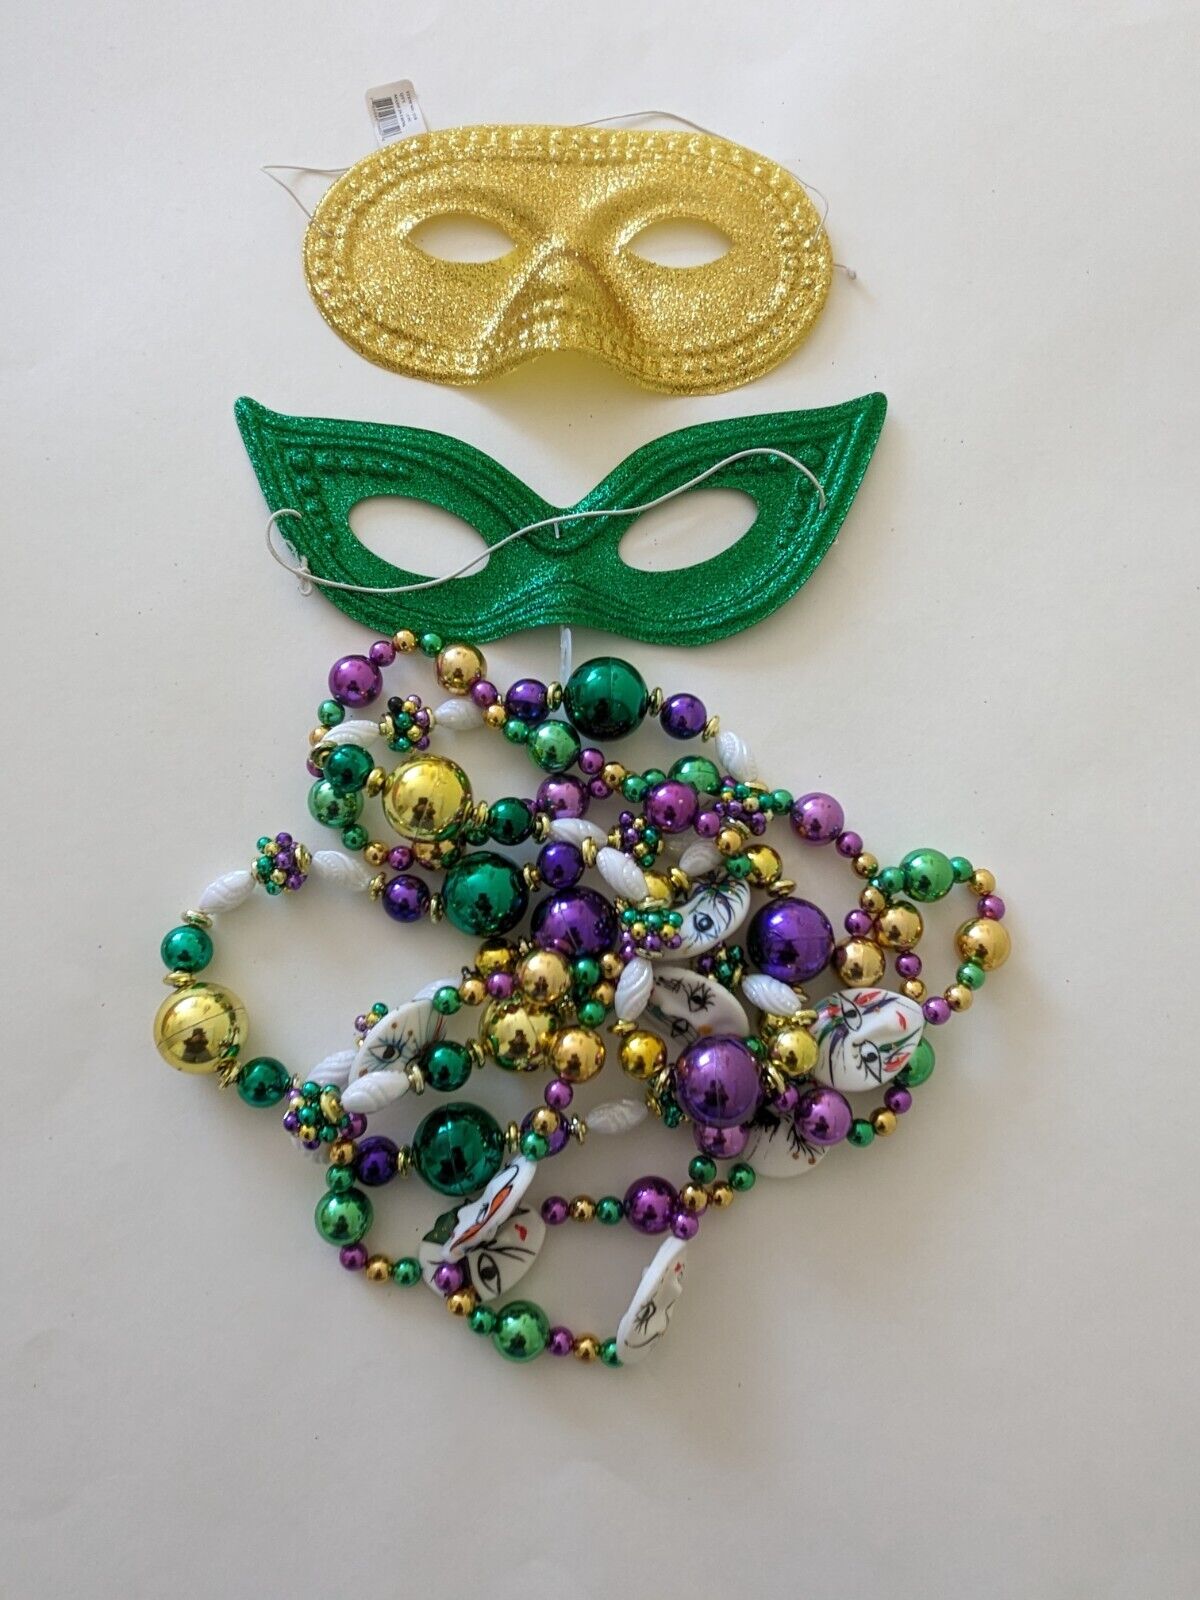 Set of 2 Mardi Gras masks and 2 strings of beads